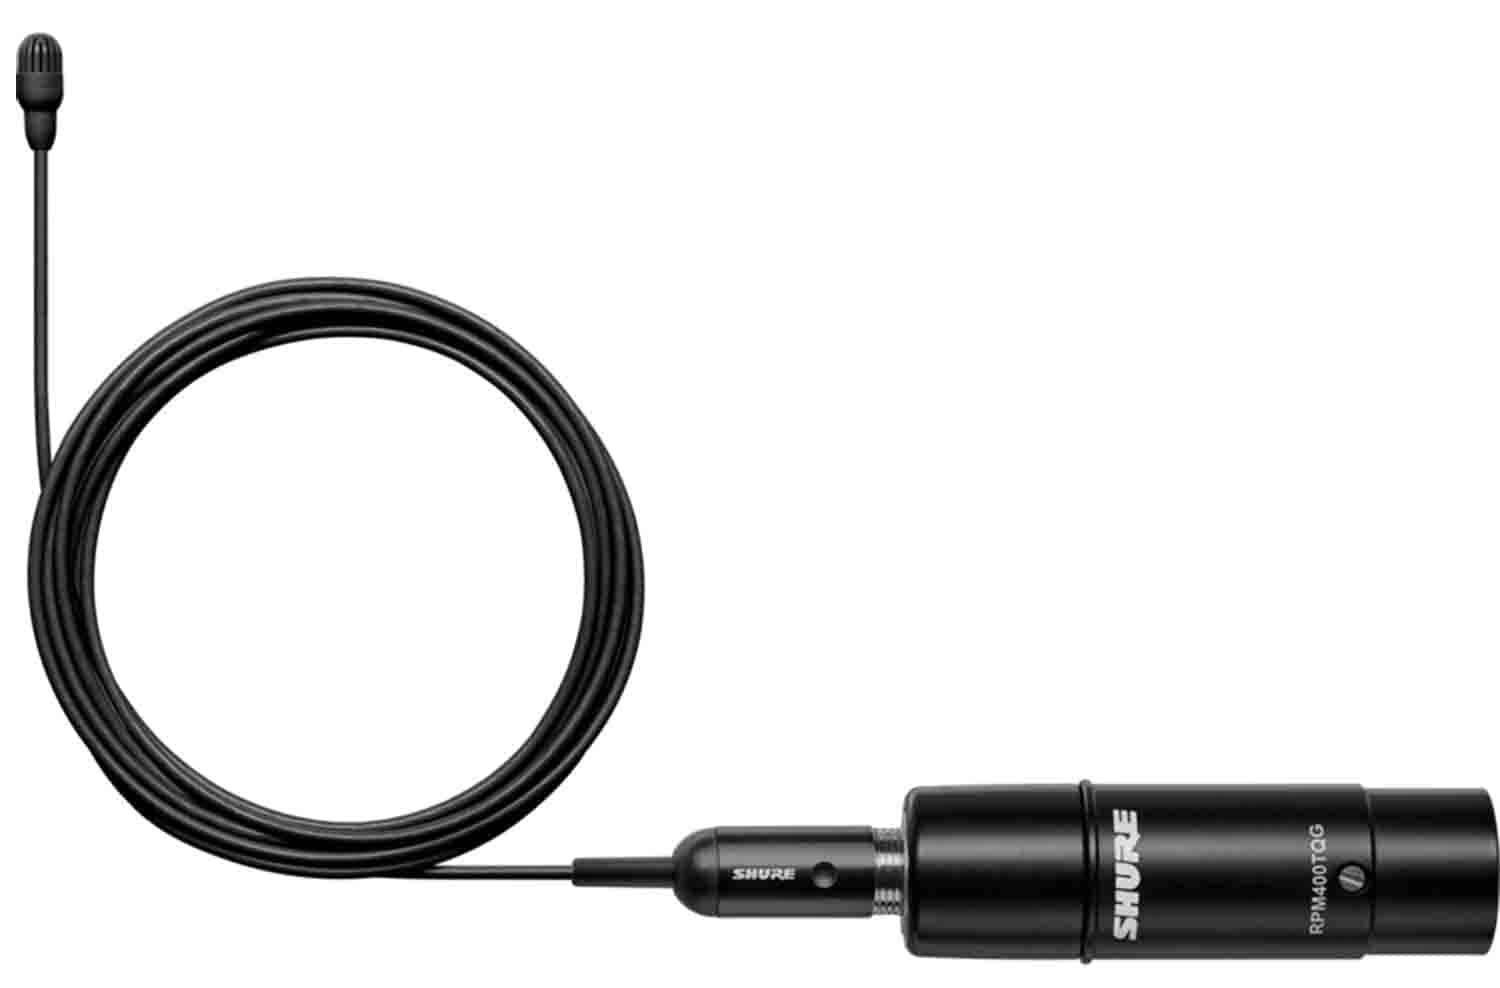 Shure TL47B/O TwinPlex TL47 Subminiature Lavalier Microphone with Accessories - Black - Hollywood DJ